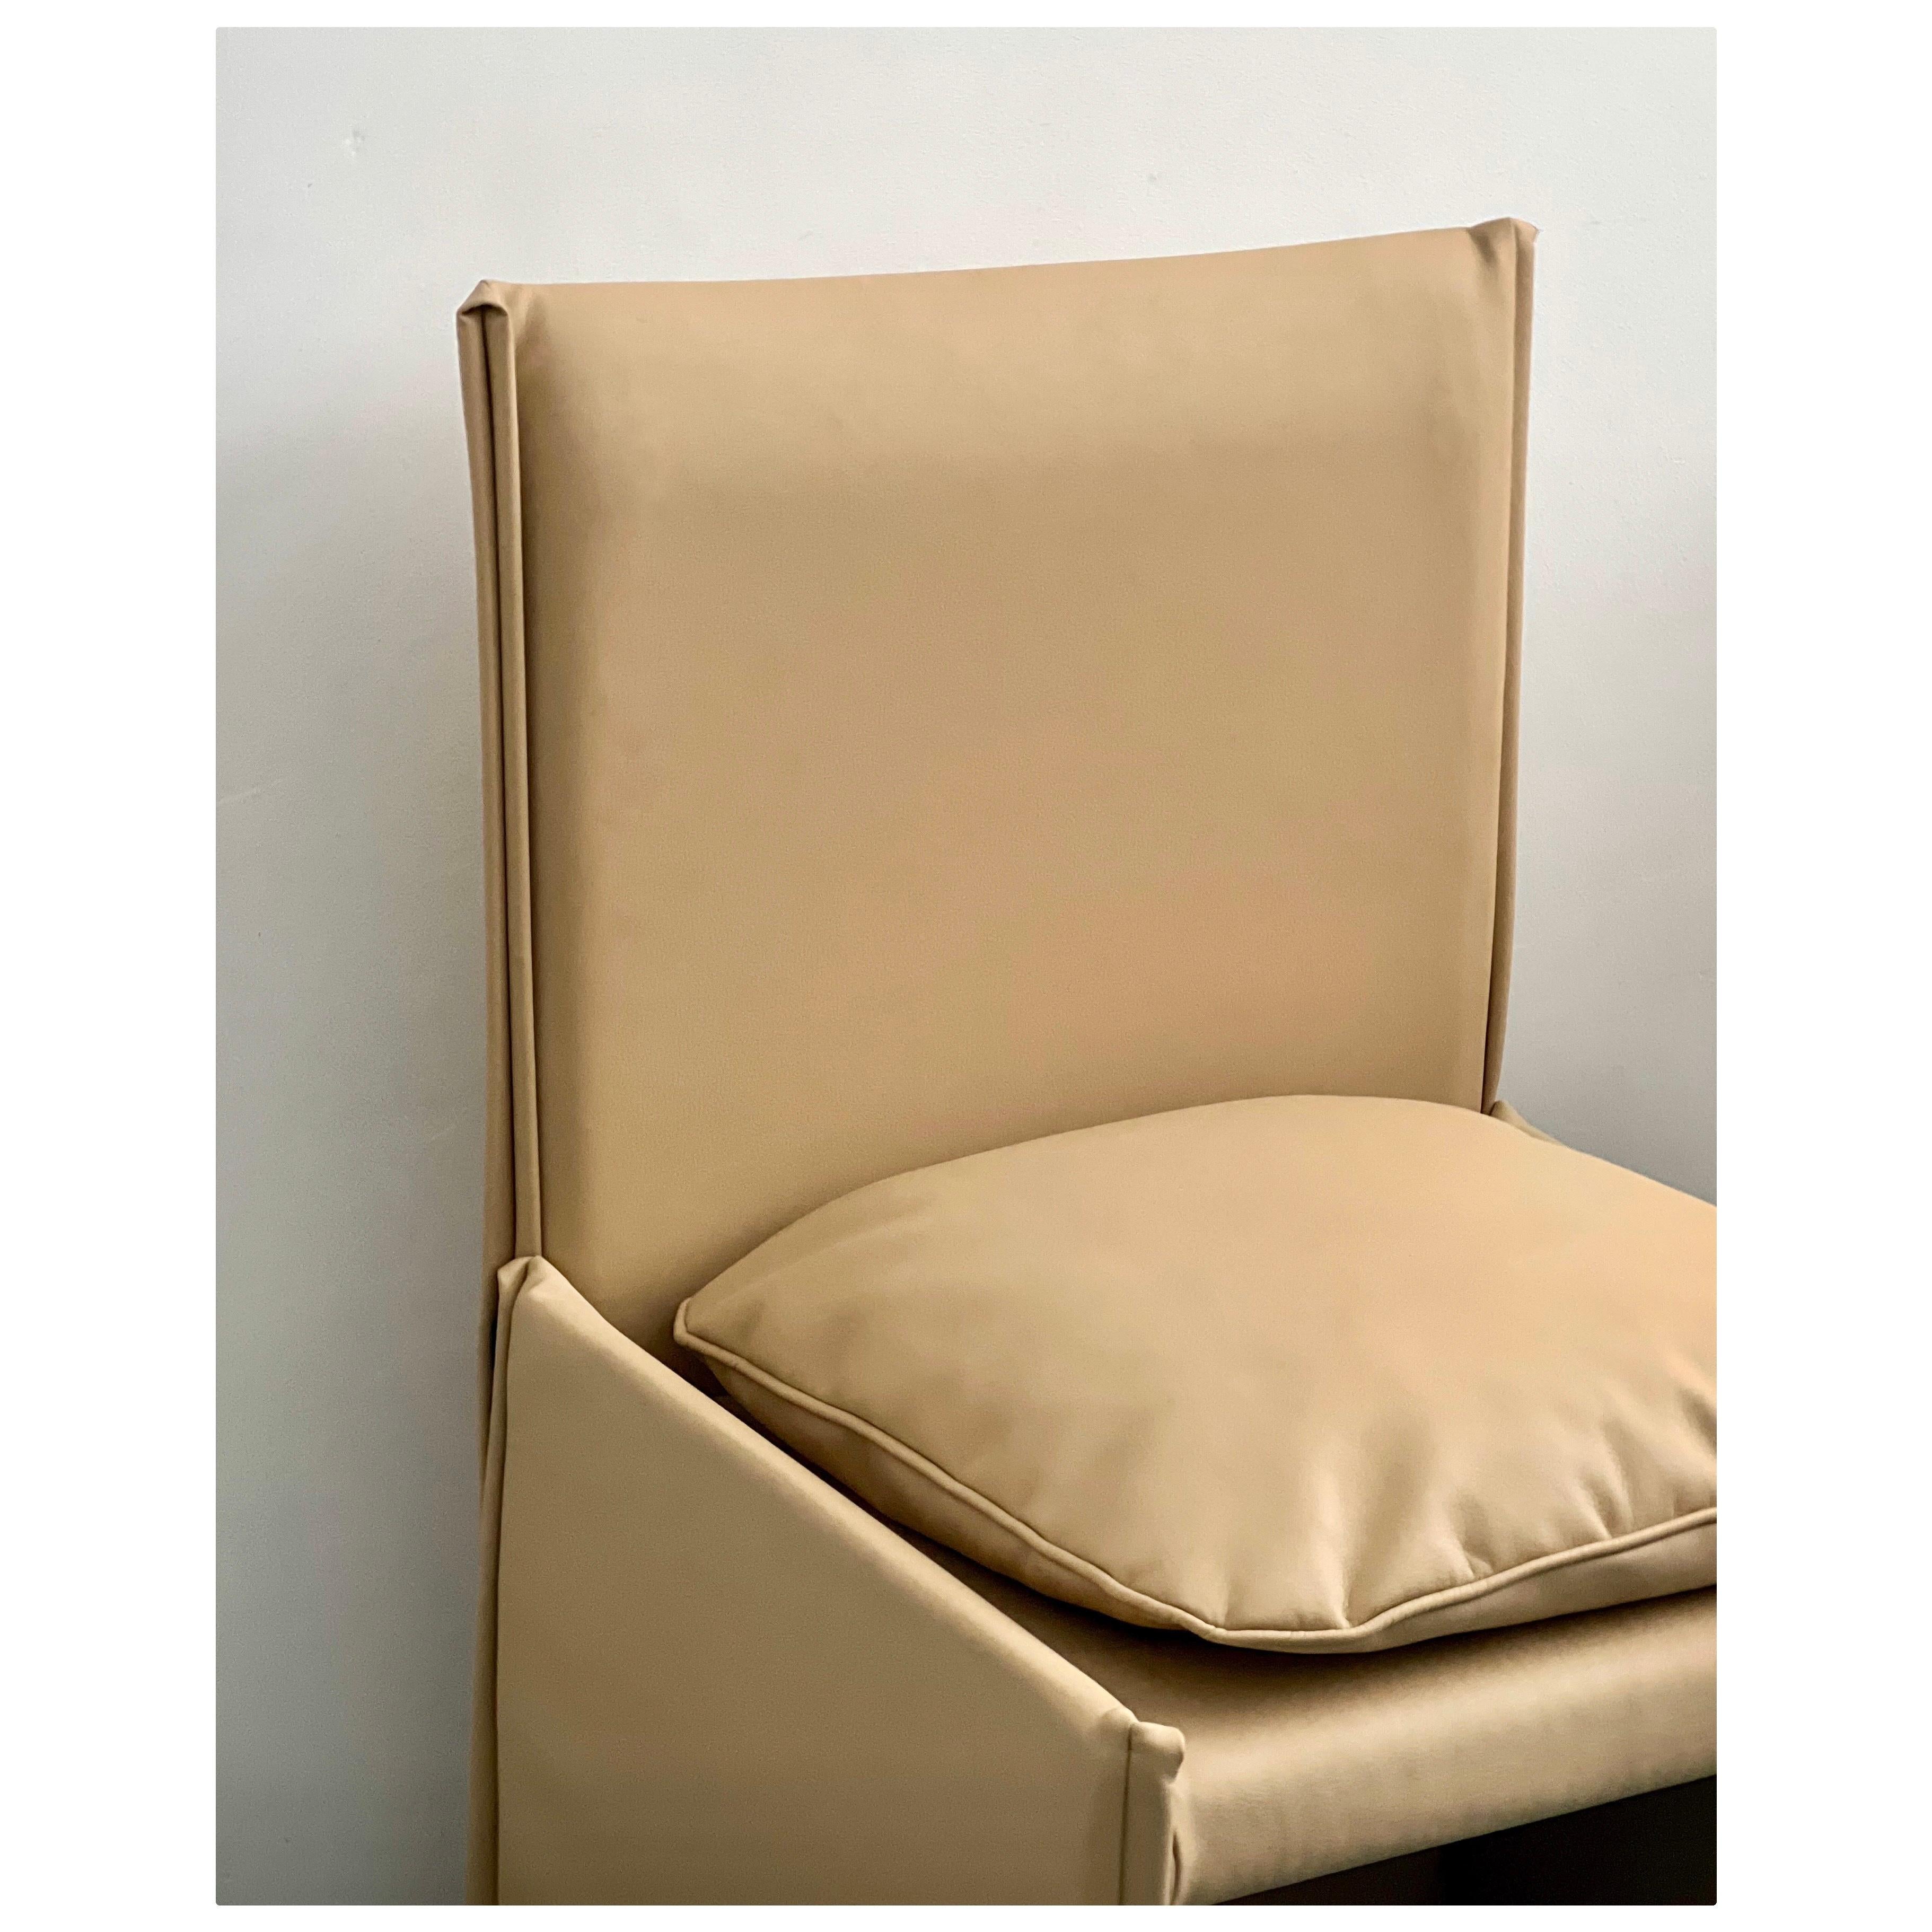 1980s Mario Bellini ''401 Break'' Leather Chair for Cassina For Sale 2